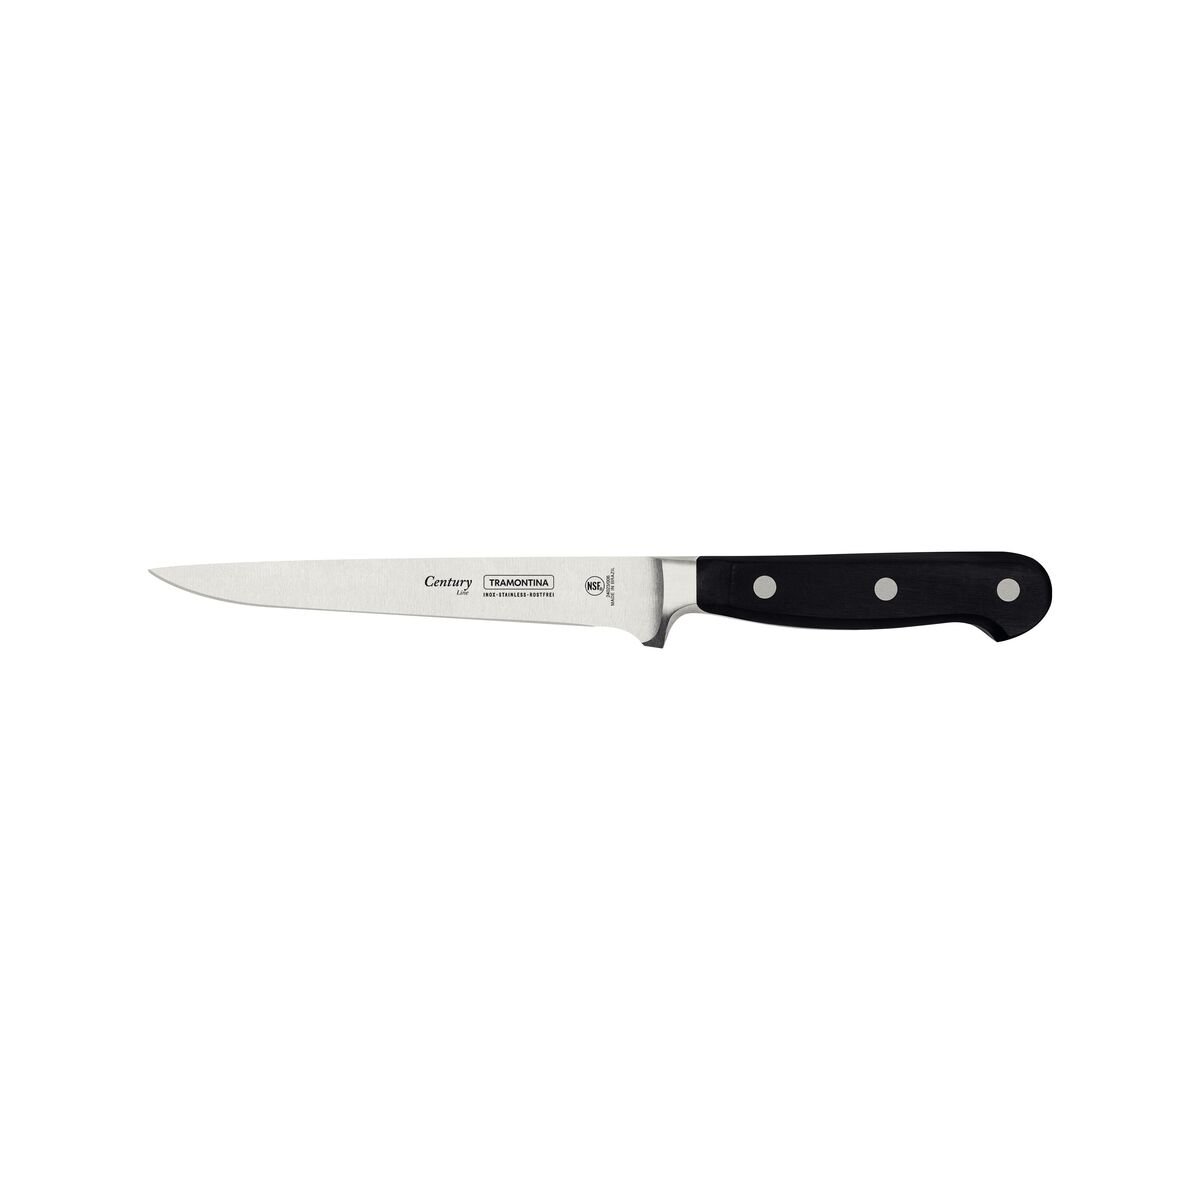 Tramontina Century 6" Filet Knife with Stainless-Steel Blade and Black Polycarbonate Handle